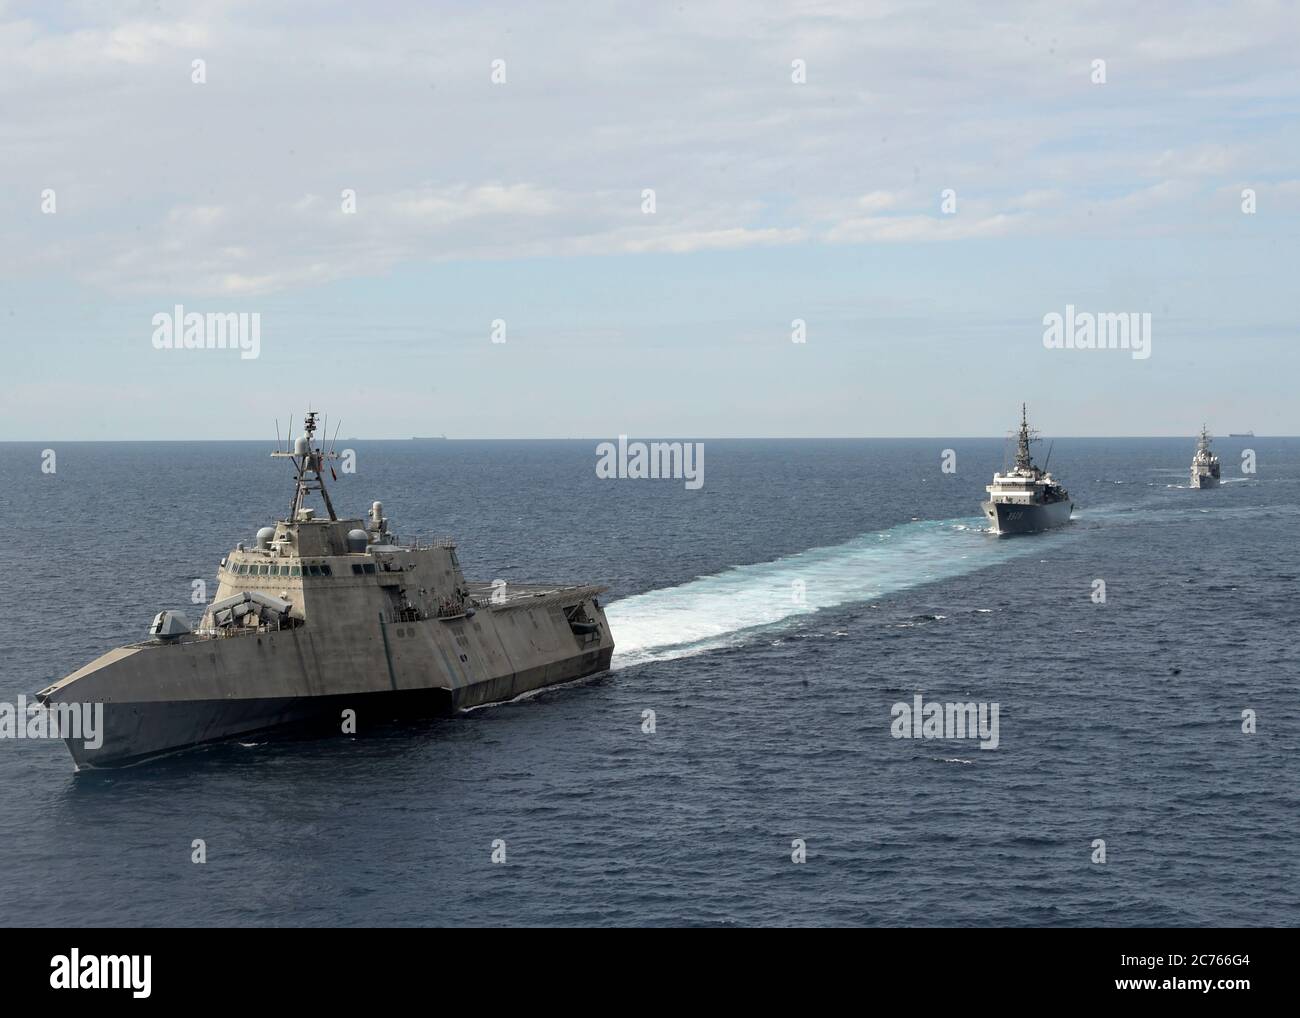 The U.S. Navy Independence-variant littoral combat ship USS Gabrielle Giffords during a joint patrol with the Japan Maritime Self-Defense Kashima class cadet training ship JS Kashima and Force Hatsuyuki-class destroyer JS Shimayuki in International Waters June 23, 2020 in the South China Sea. Stock Photo